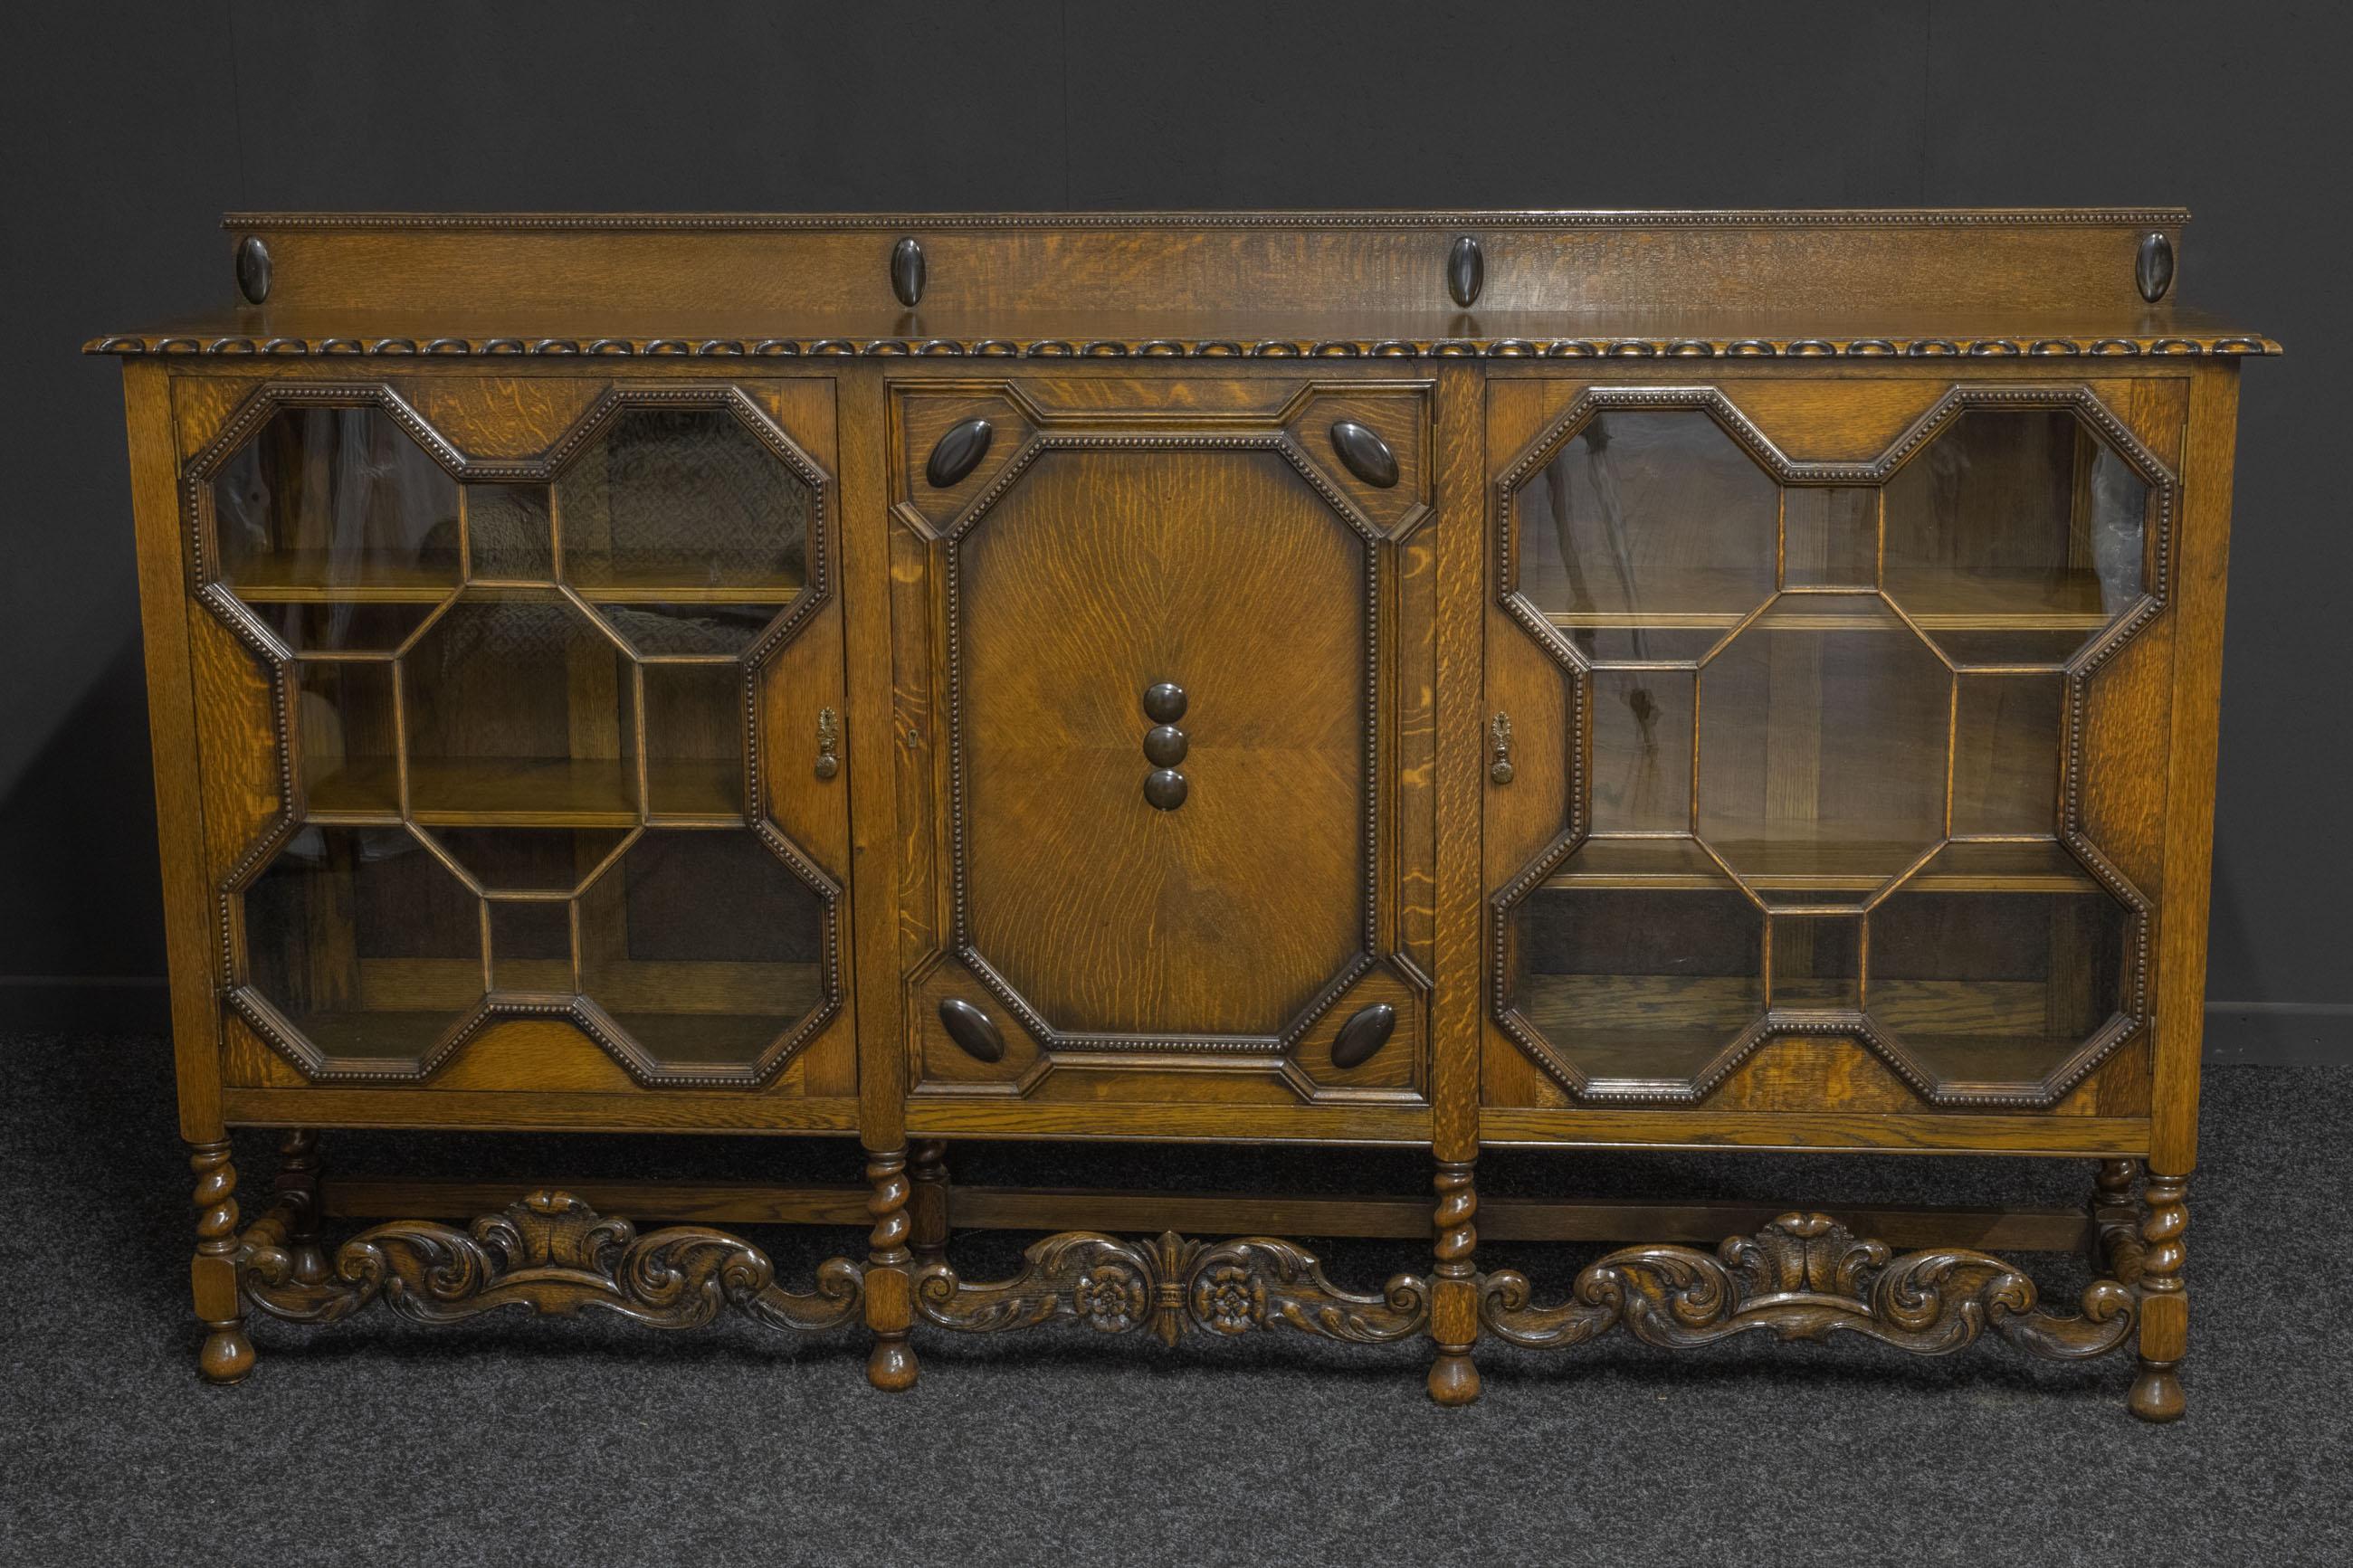 A superb solid oak bookcase designed in the Jacobean style. The octagonal geometric framing to the glazed doors is most unusual, as are the carved stretchers to the base. An unusually long bookcase that will look fantastic in the right setting as